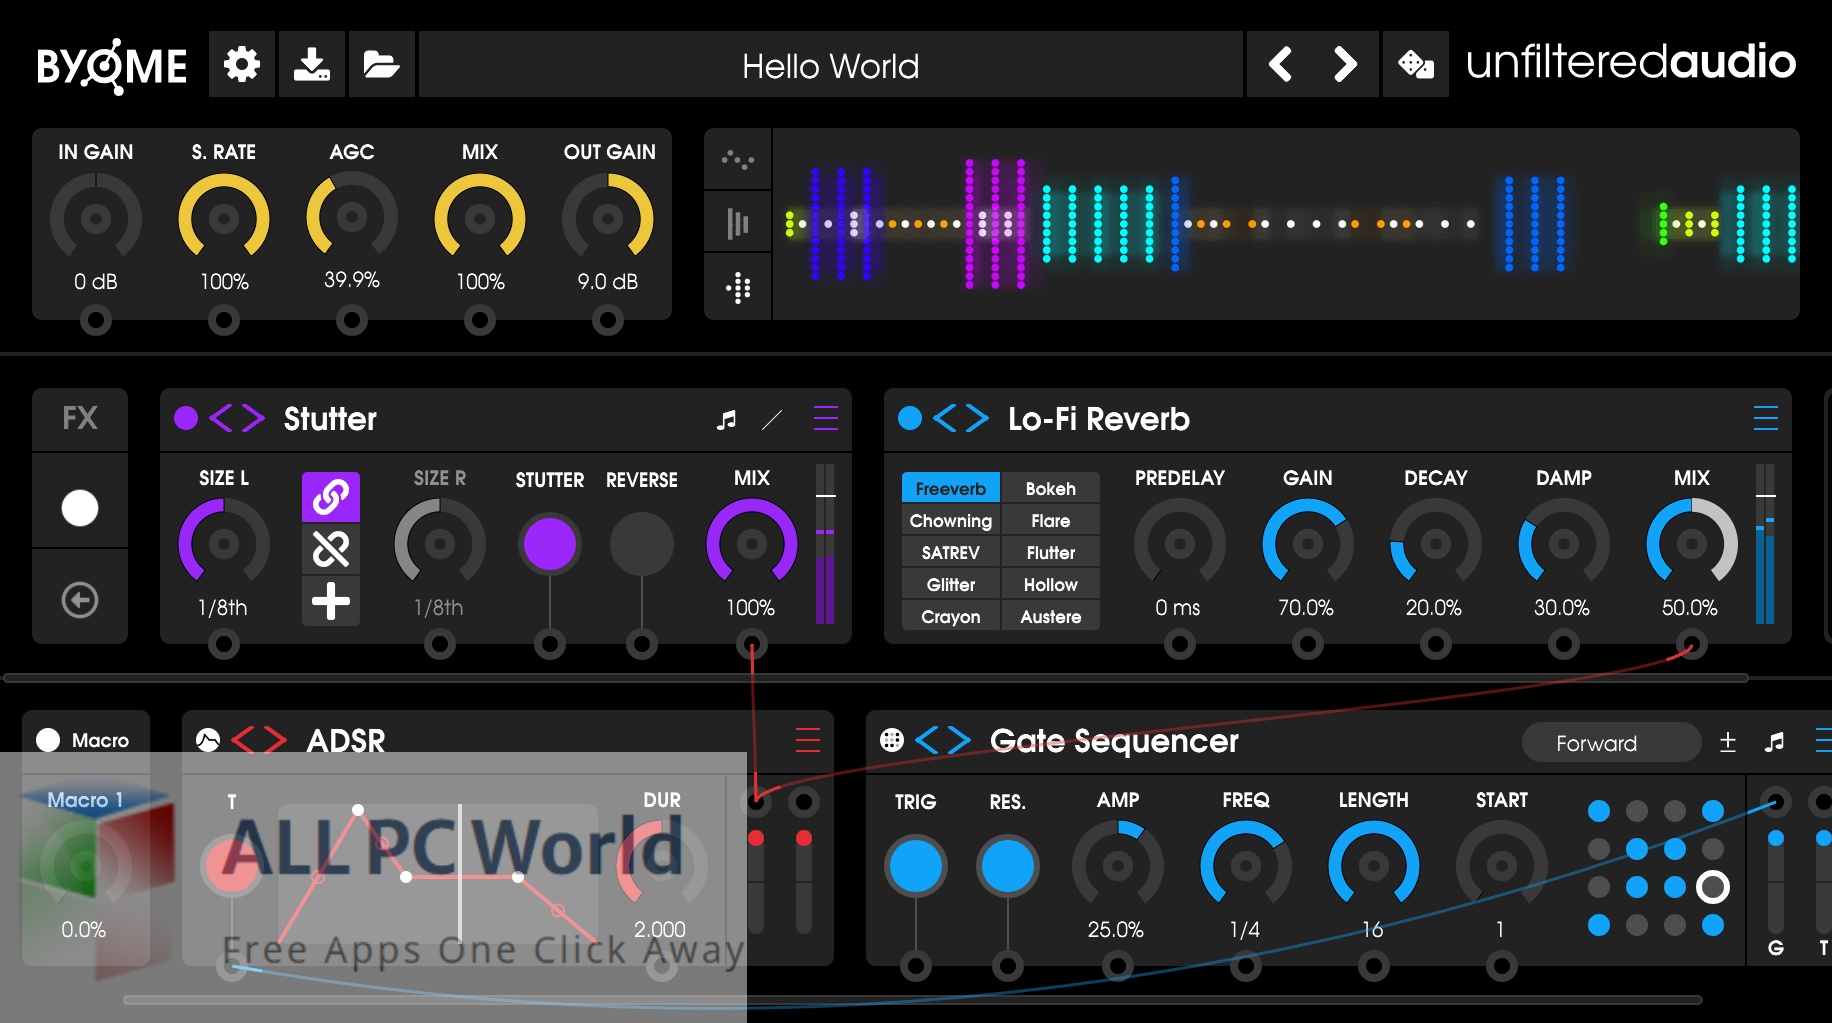 Unfiltered Audio Byome Free Download